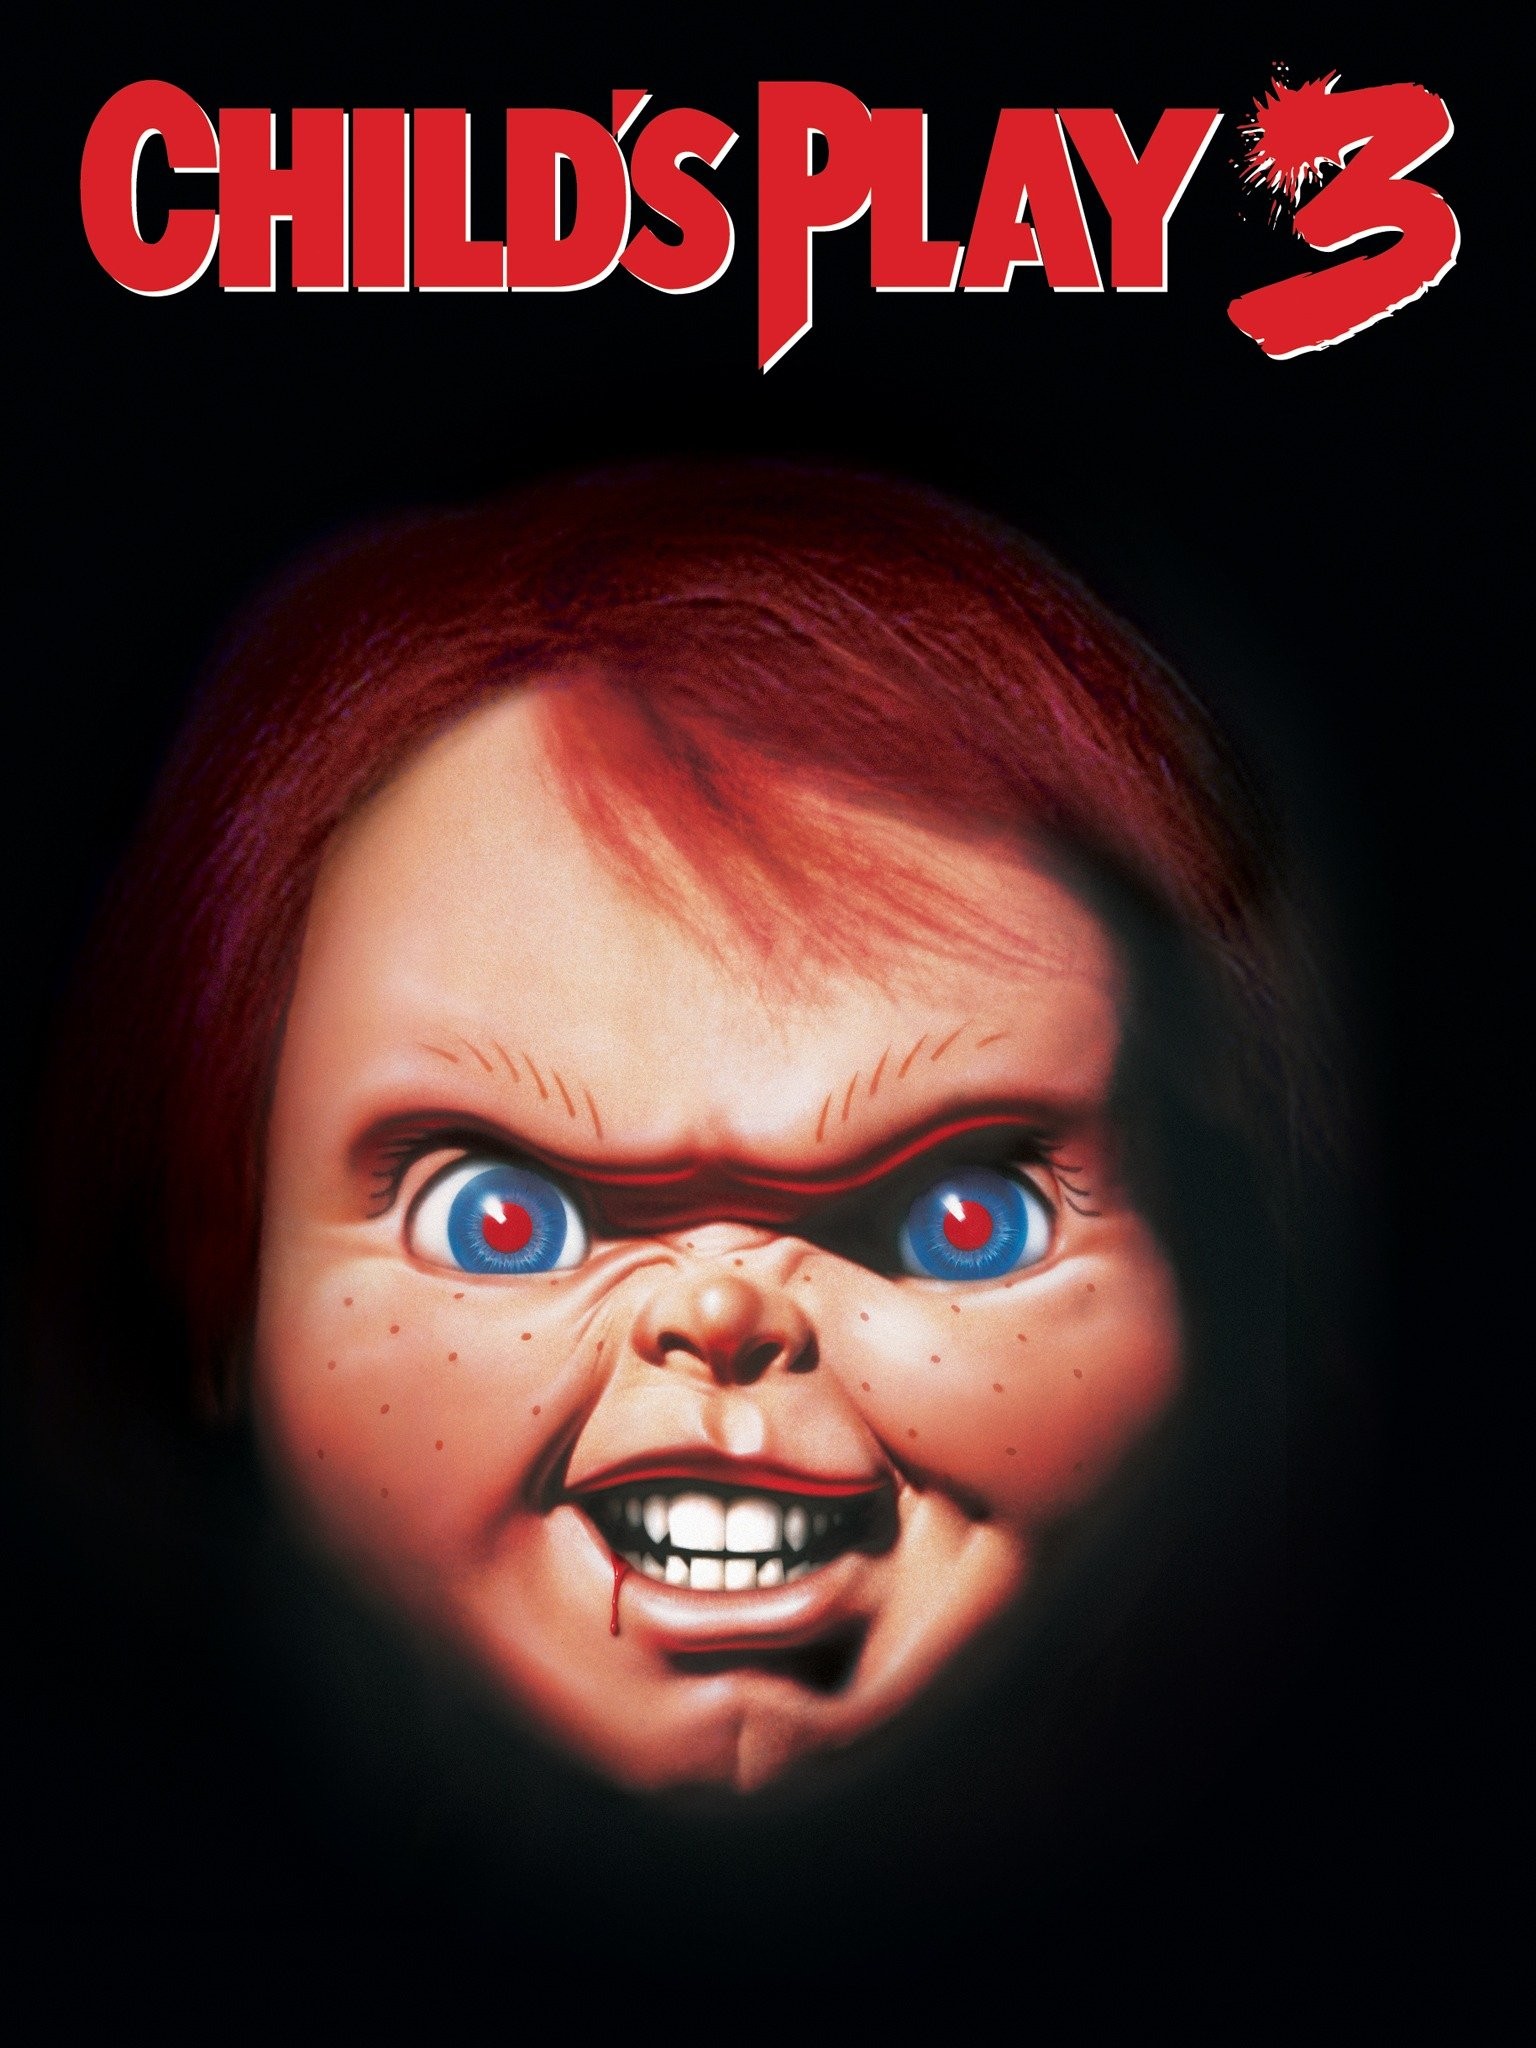 Chucky Complete Movie Collection 1 2 3 4 5 6 7 Childs Play DVD Set Horror  NEW